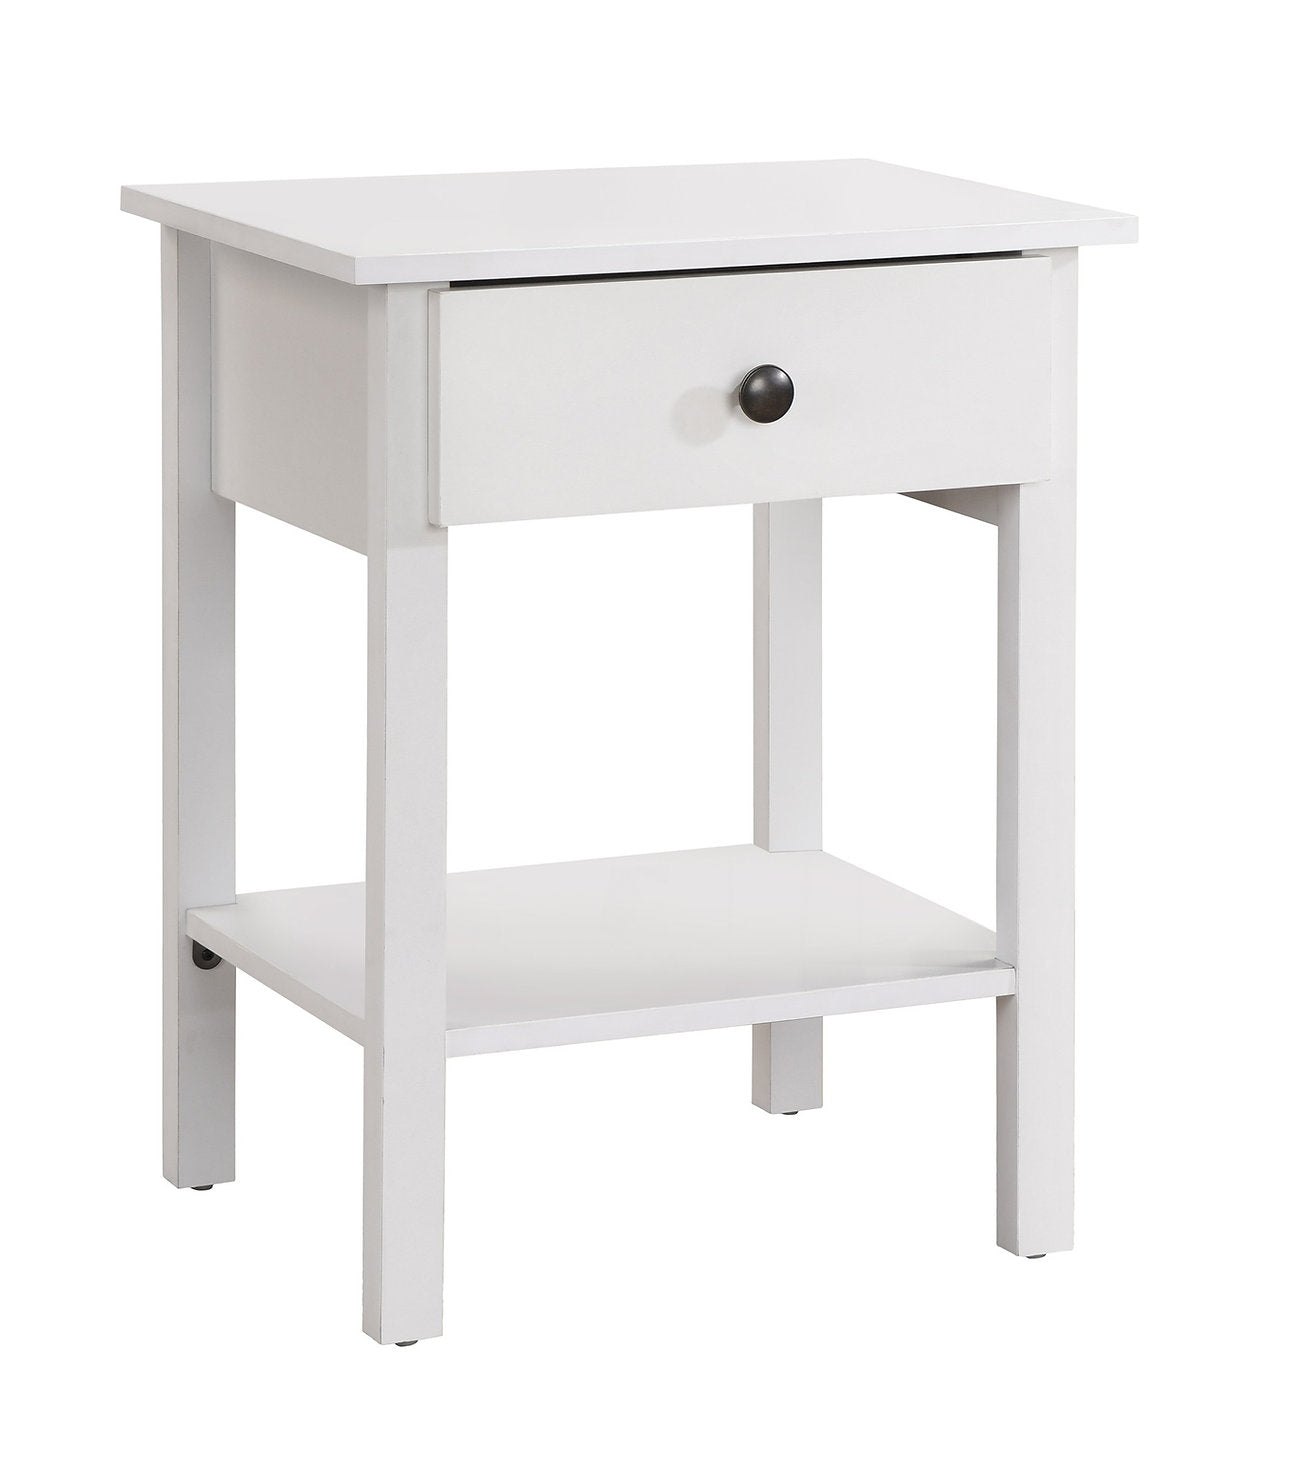 Night Table - White Wood Veneer with 2 Drawers  IF-3431